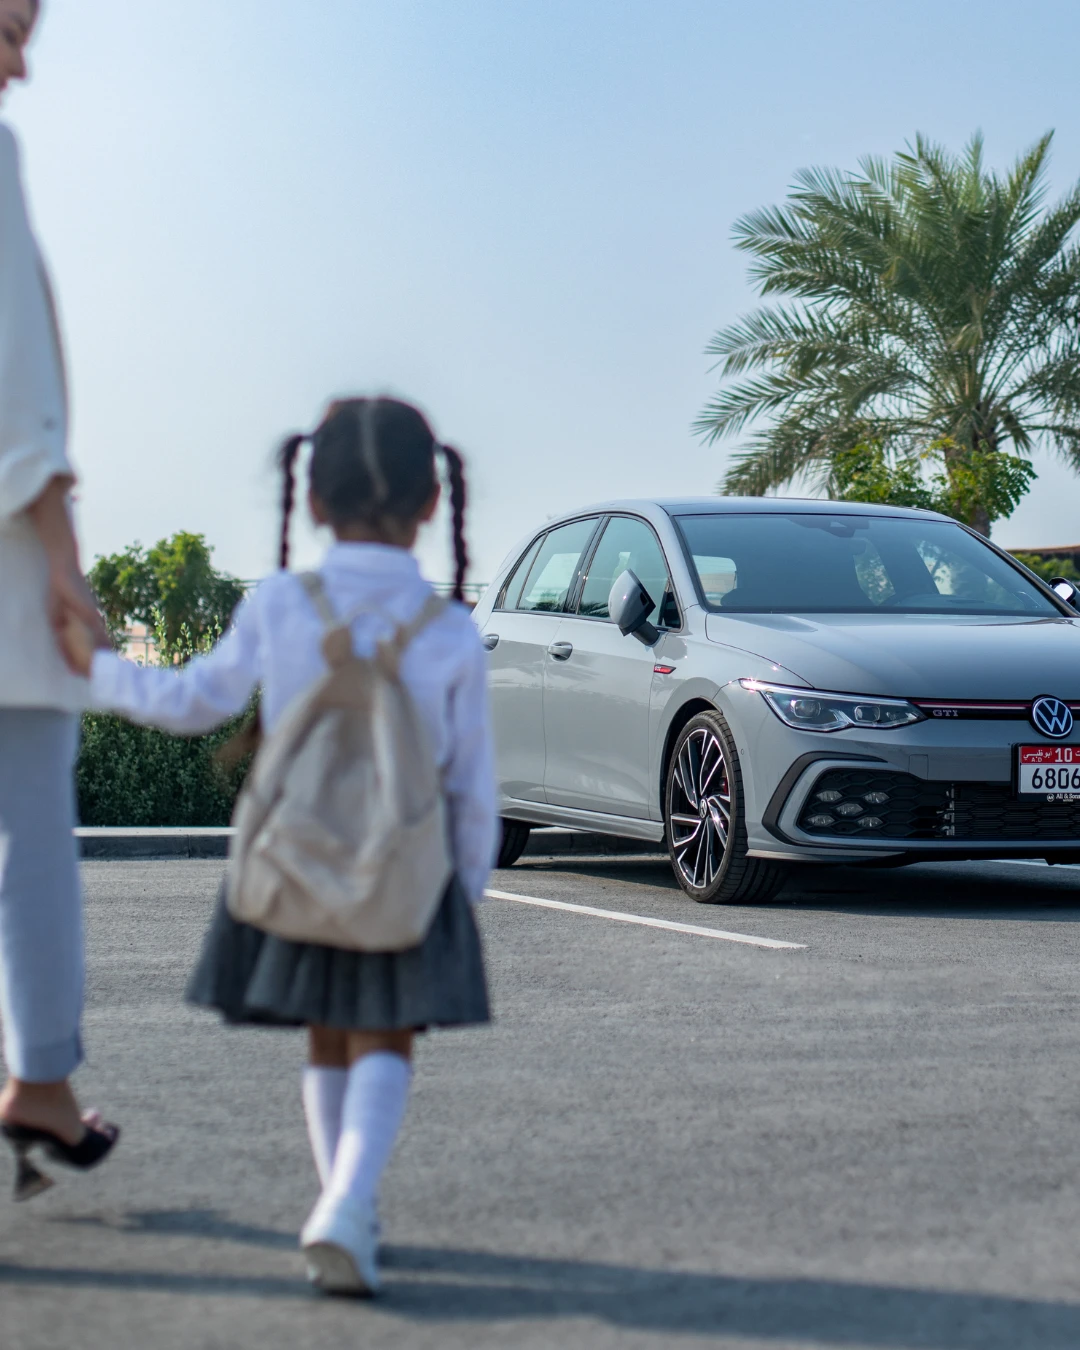 Driven by Love - Volkswagen Celebrates Mother’s Day